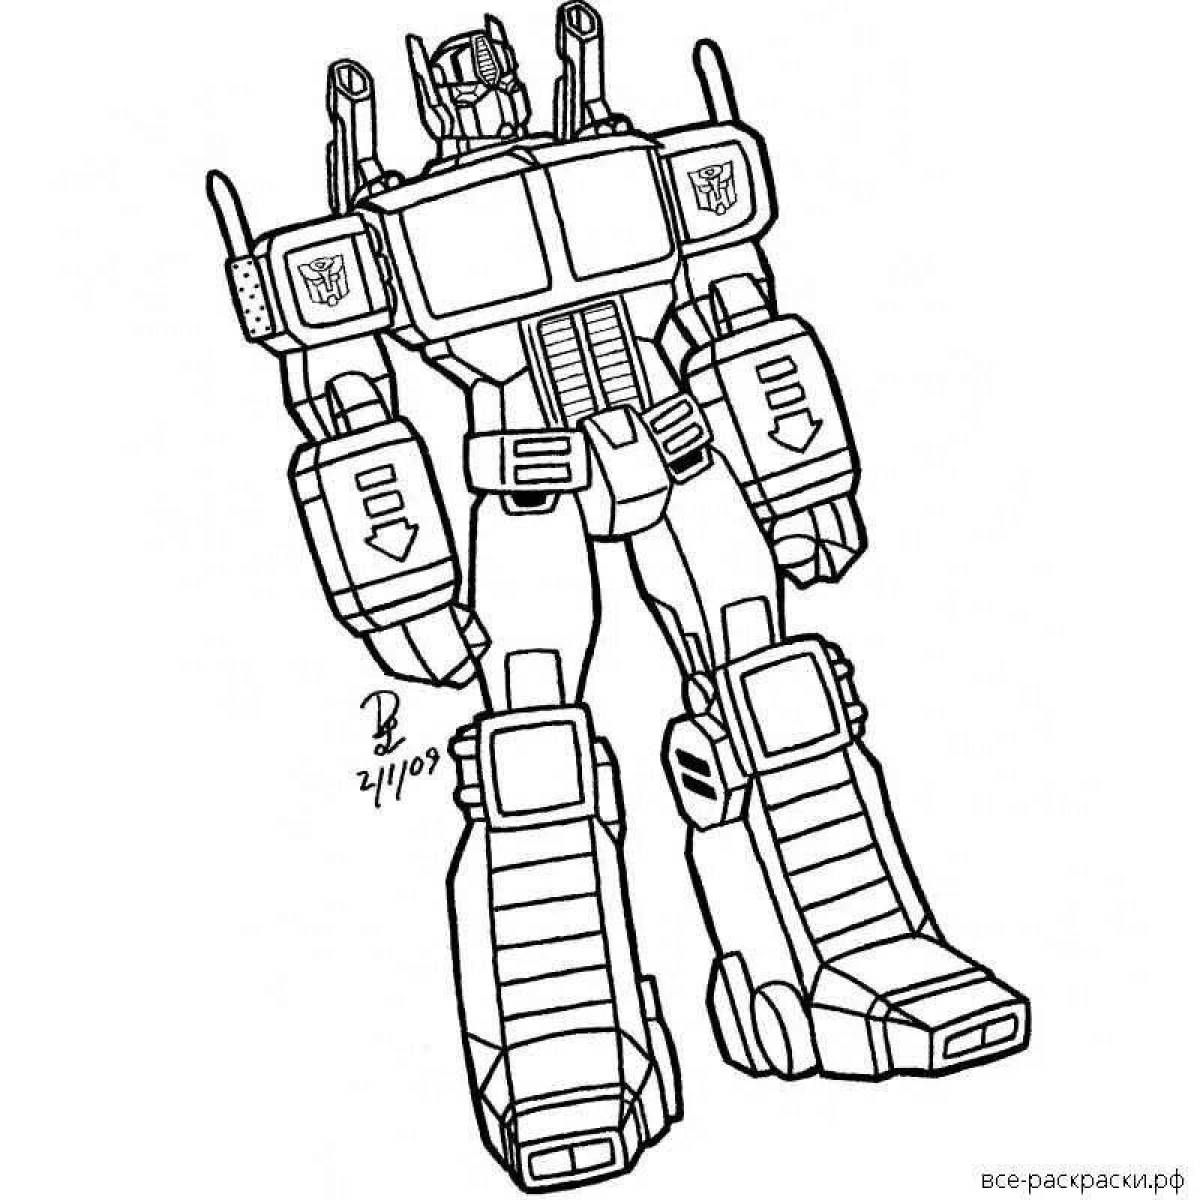 Impressive police robot coloring page